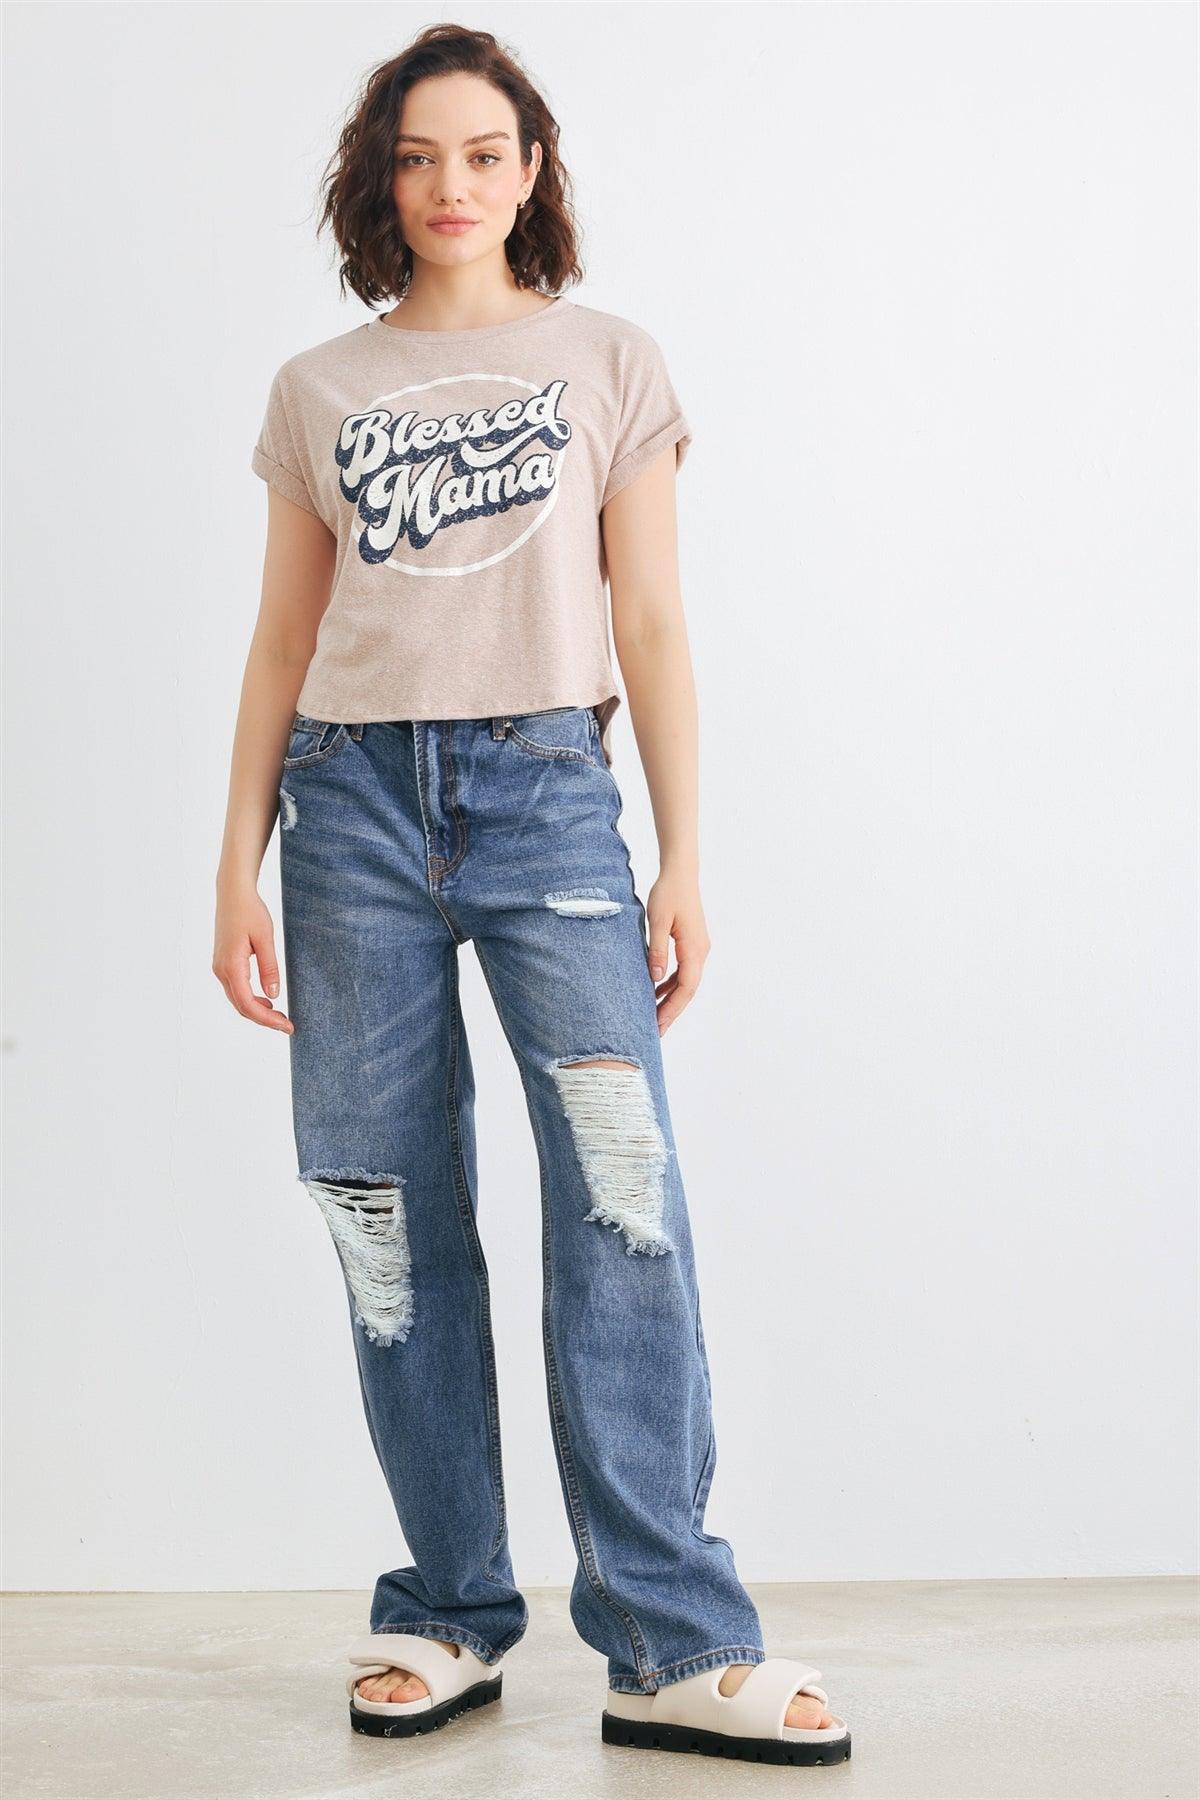 Mocha "Blessed Mama" Roll-Up Short Sleeve Crop Top /2-2-2